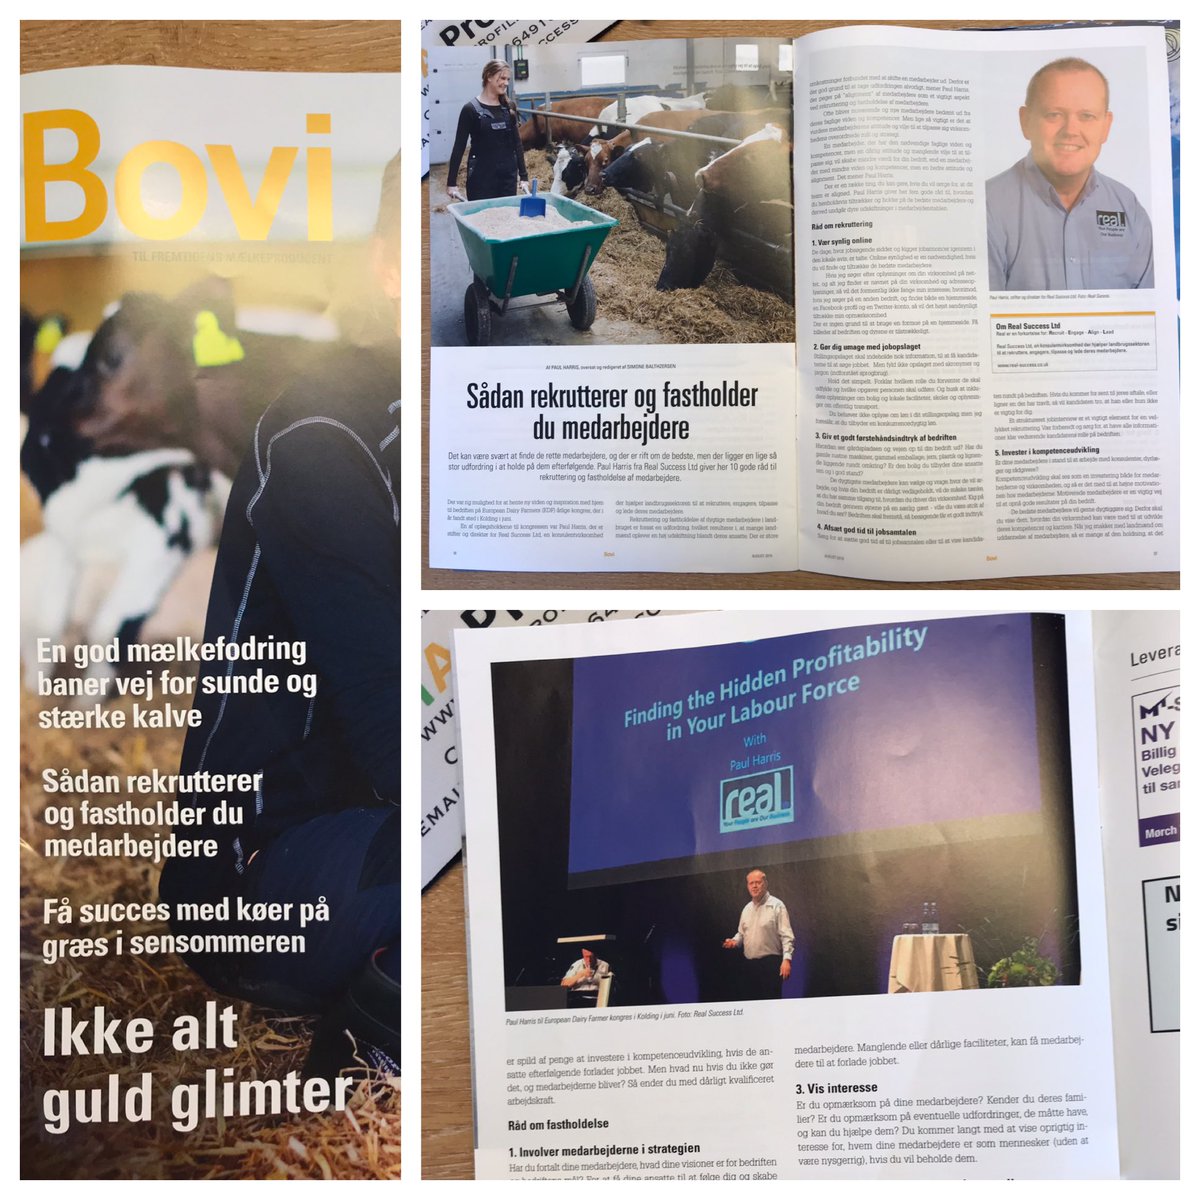 Our first appearance in an international trade magazine. This is Bovi, which is a Danish magazine reporting on my talk in Denmark at the European Dairy Farmers Congress. #goinginternational #yourpeopleareourbusiness #teamdairy #lovefarming #realsuccess